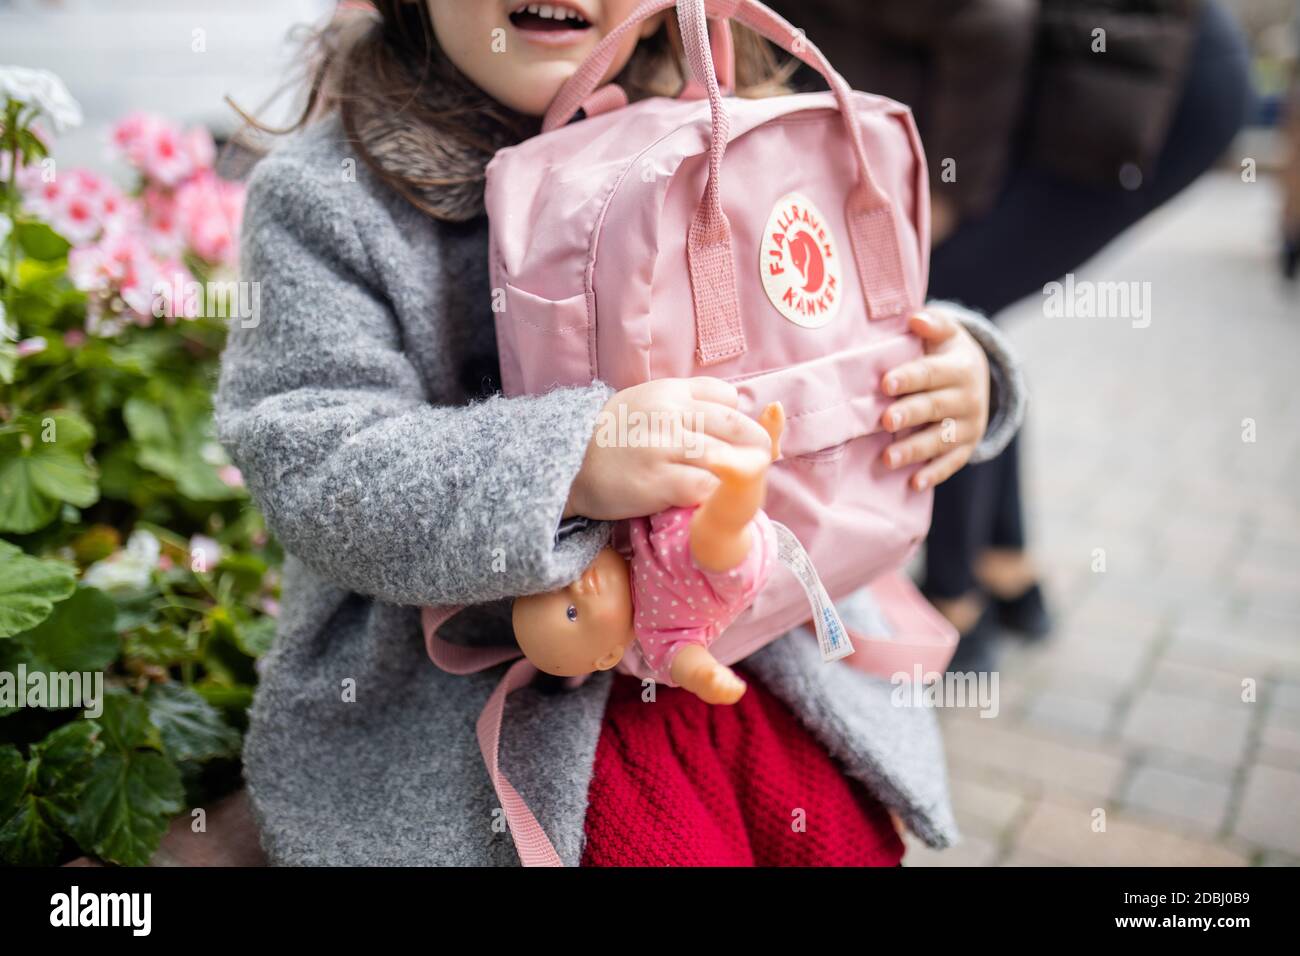 Little girl with flowers behind her hugging a pink backpack and small doll Stock Photo